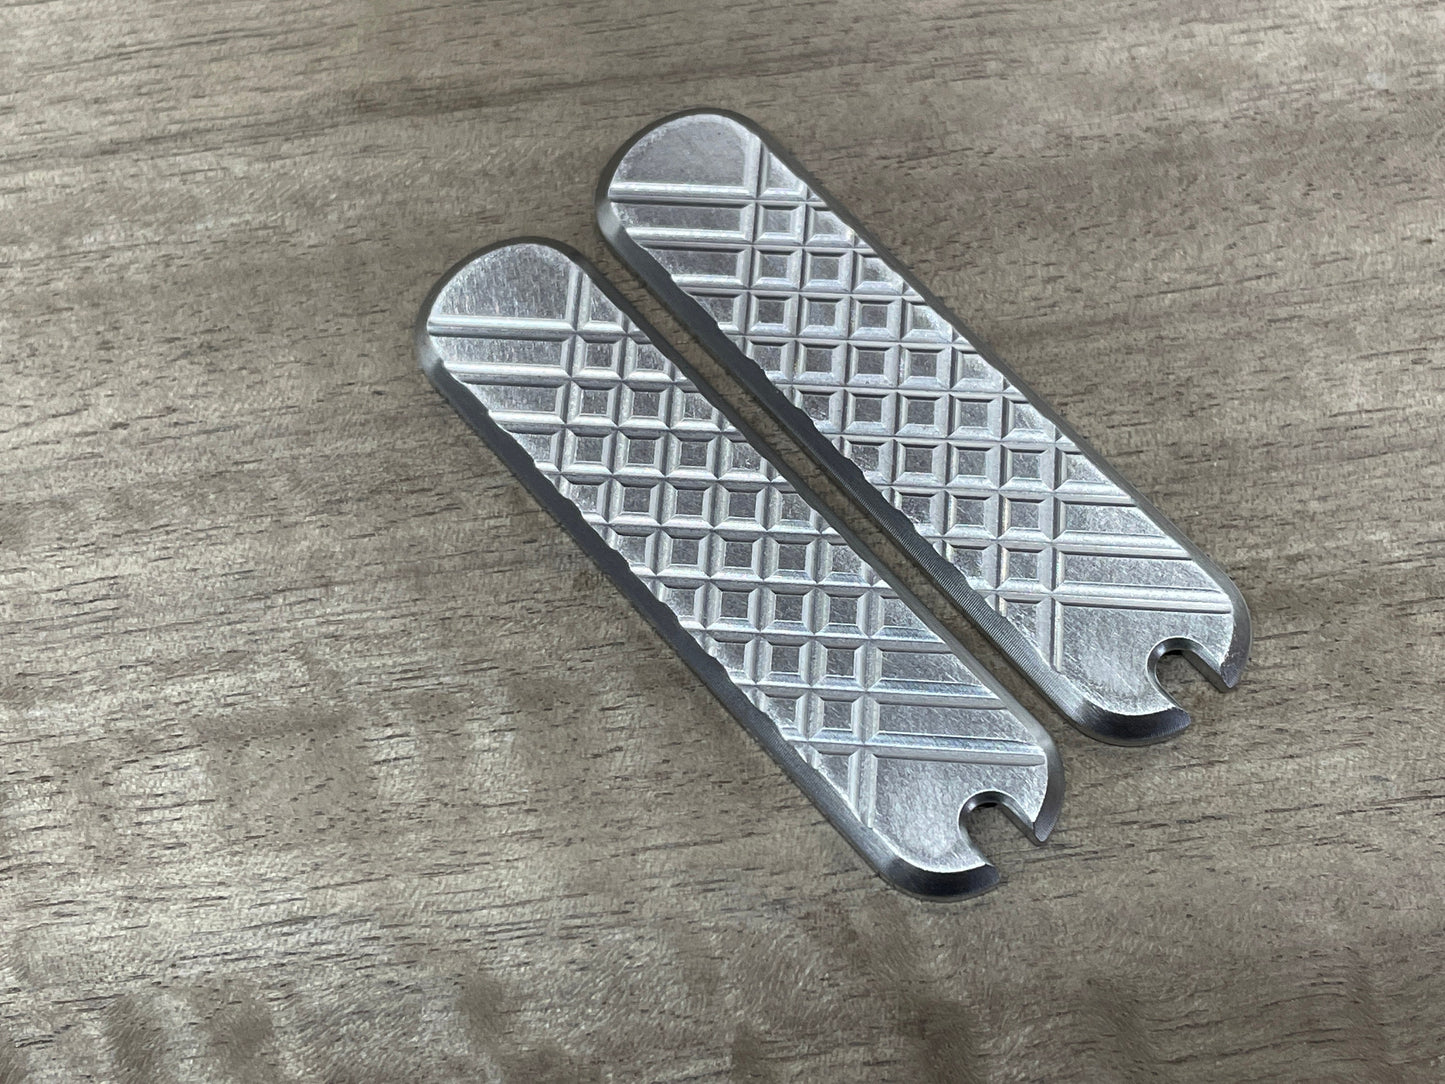 Deep Brushed FRAG Cnc milled 58mm Titanium Scales for Swiss Army SAK